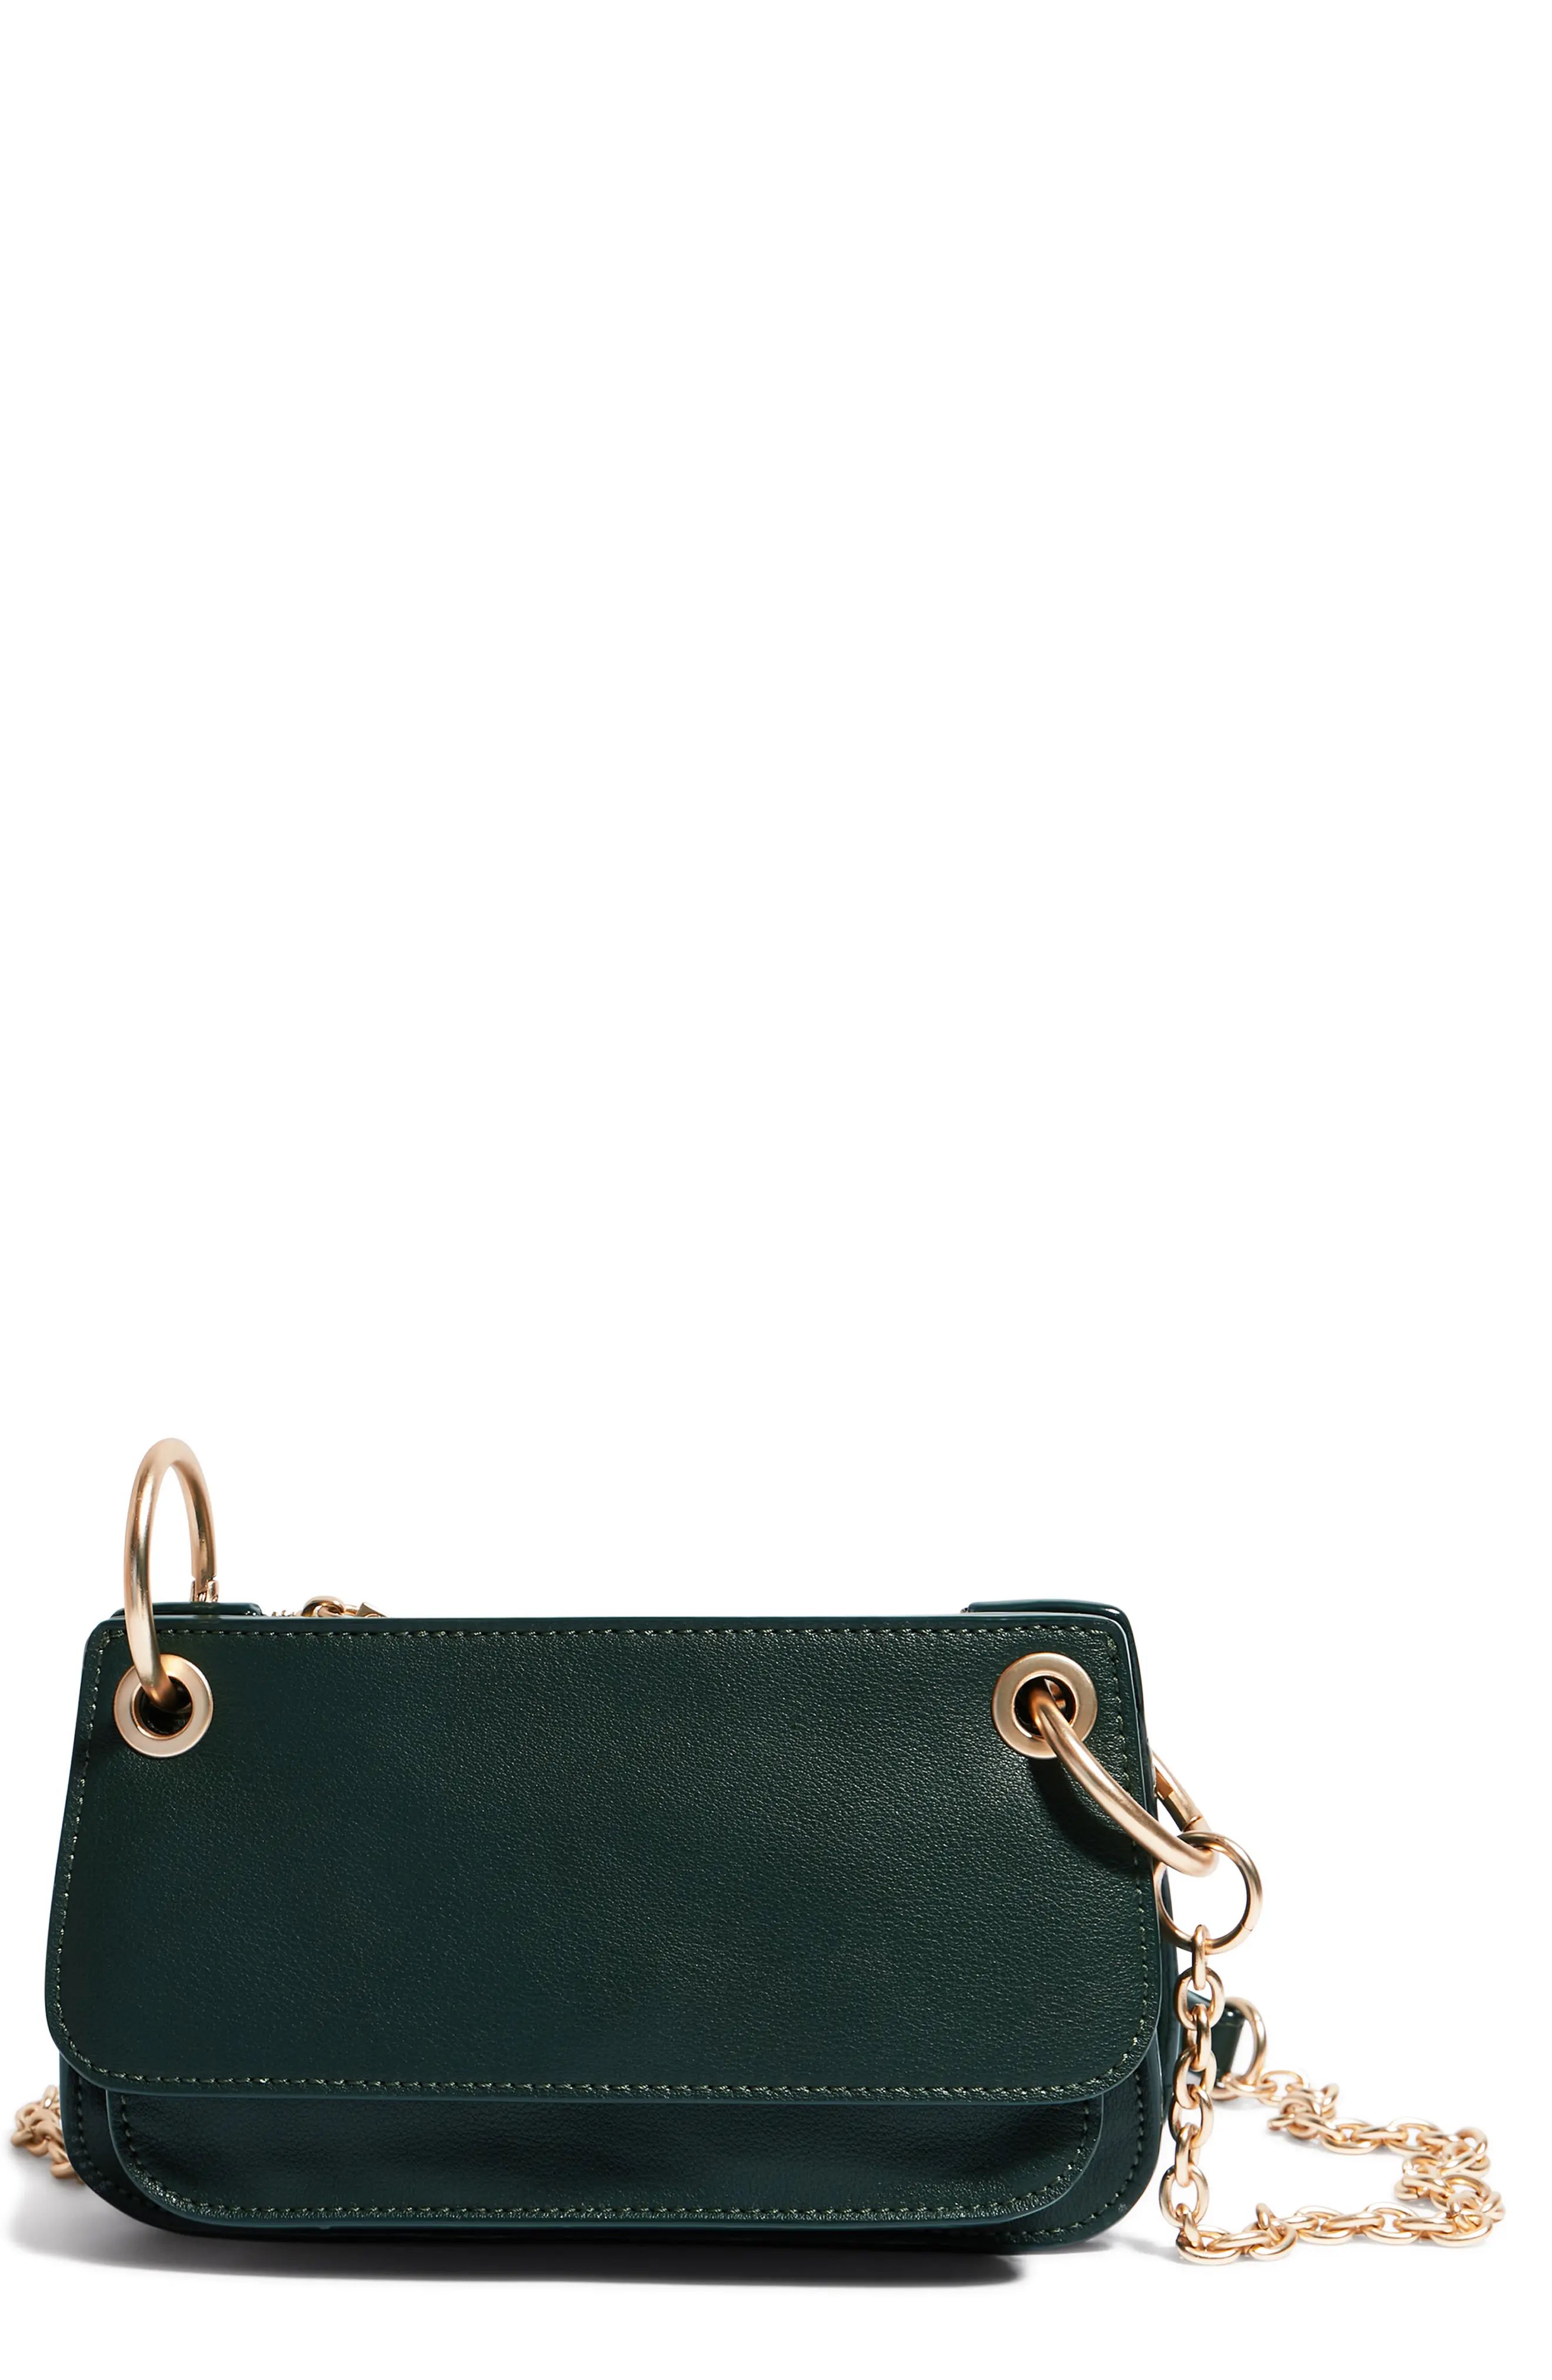 HOUSE OF WANT H.O.W. We Carry-On Phone Crossbody Bag in Hunter Green at Nordstrom | Nordstrom